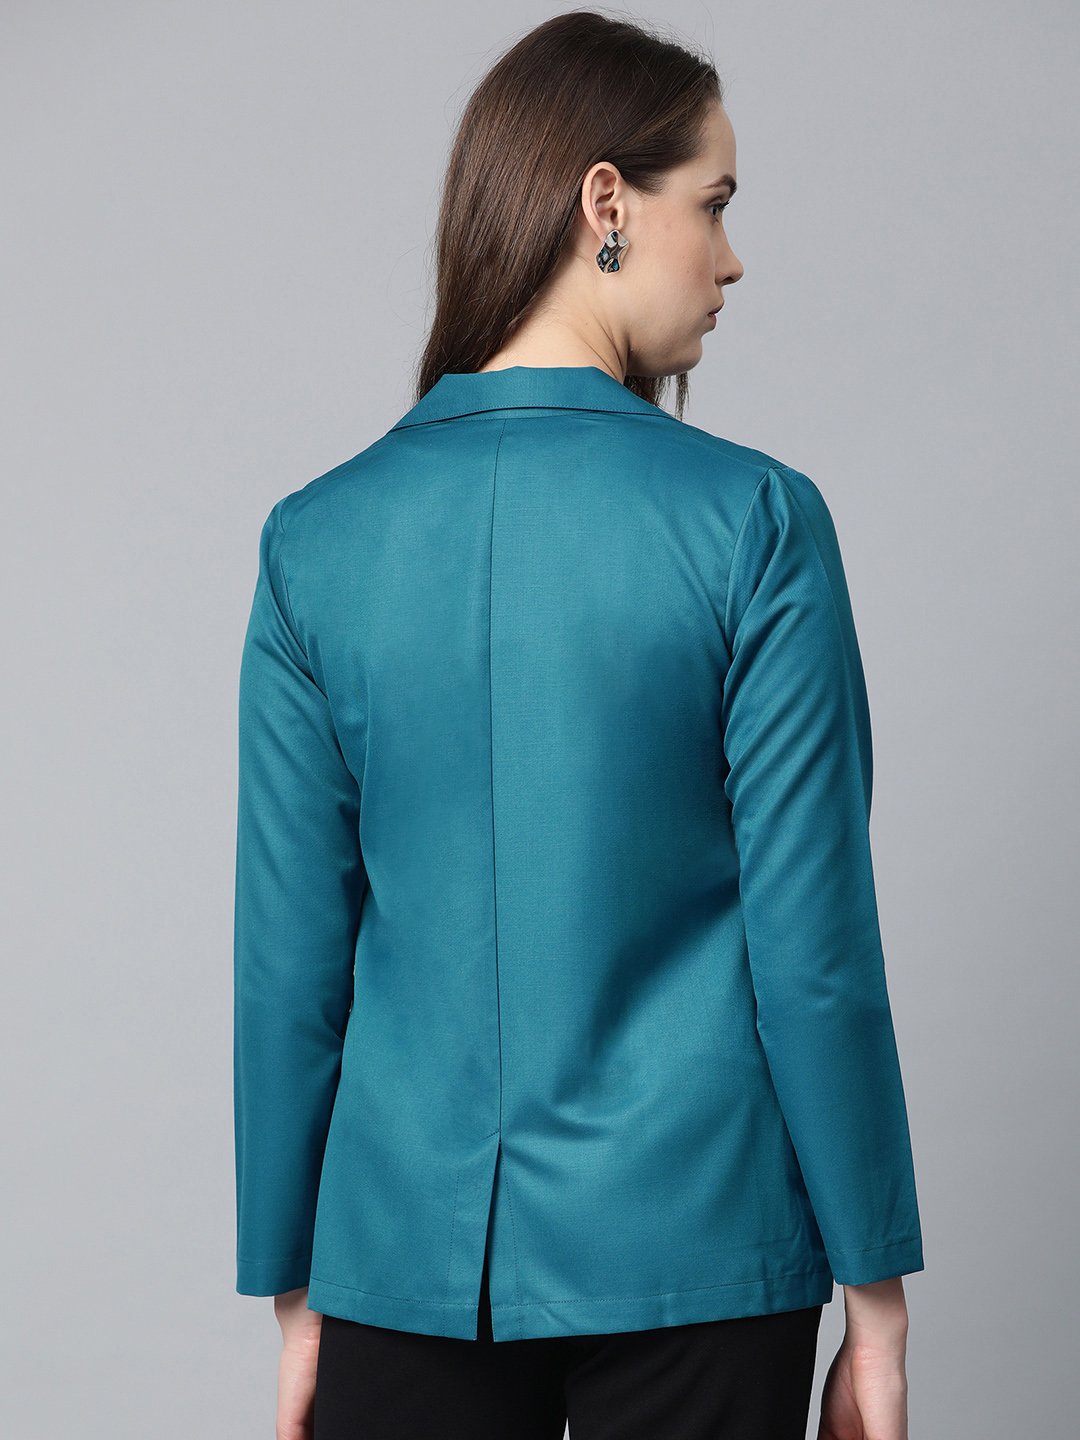 Women's Teal Blue Solid Single Breasted Smart Casual Blazer - Jompers